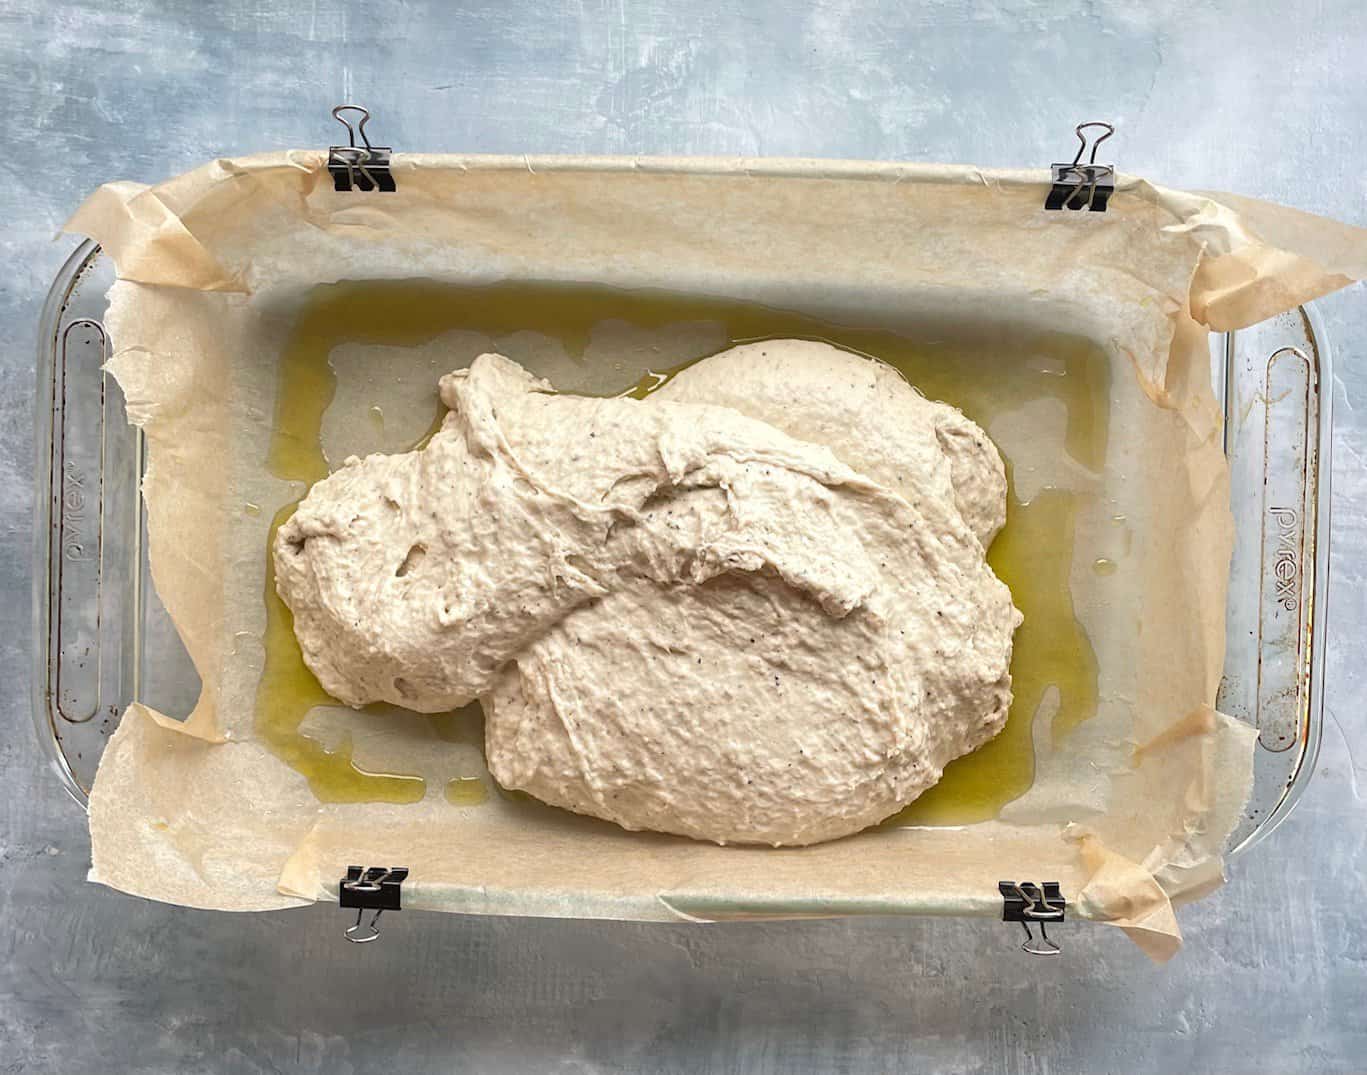 Thin wet focaccia dough in a parchment and olive oil-lined baking dish.